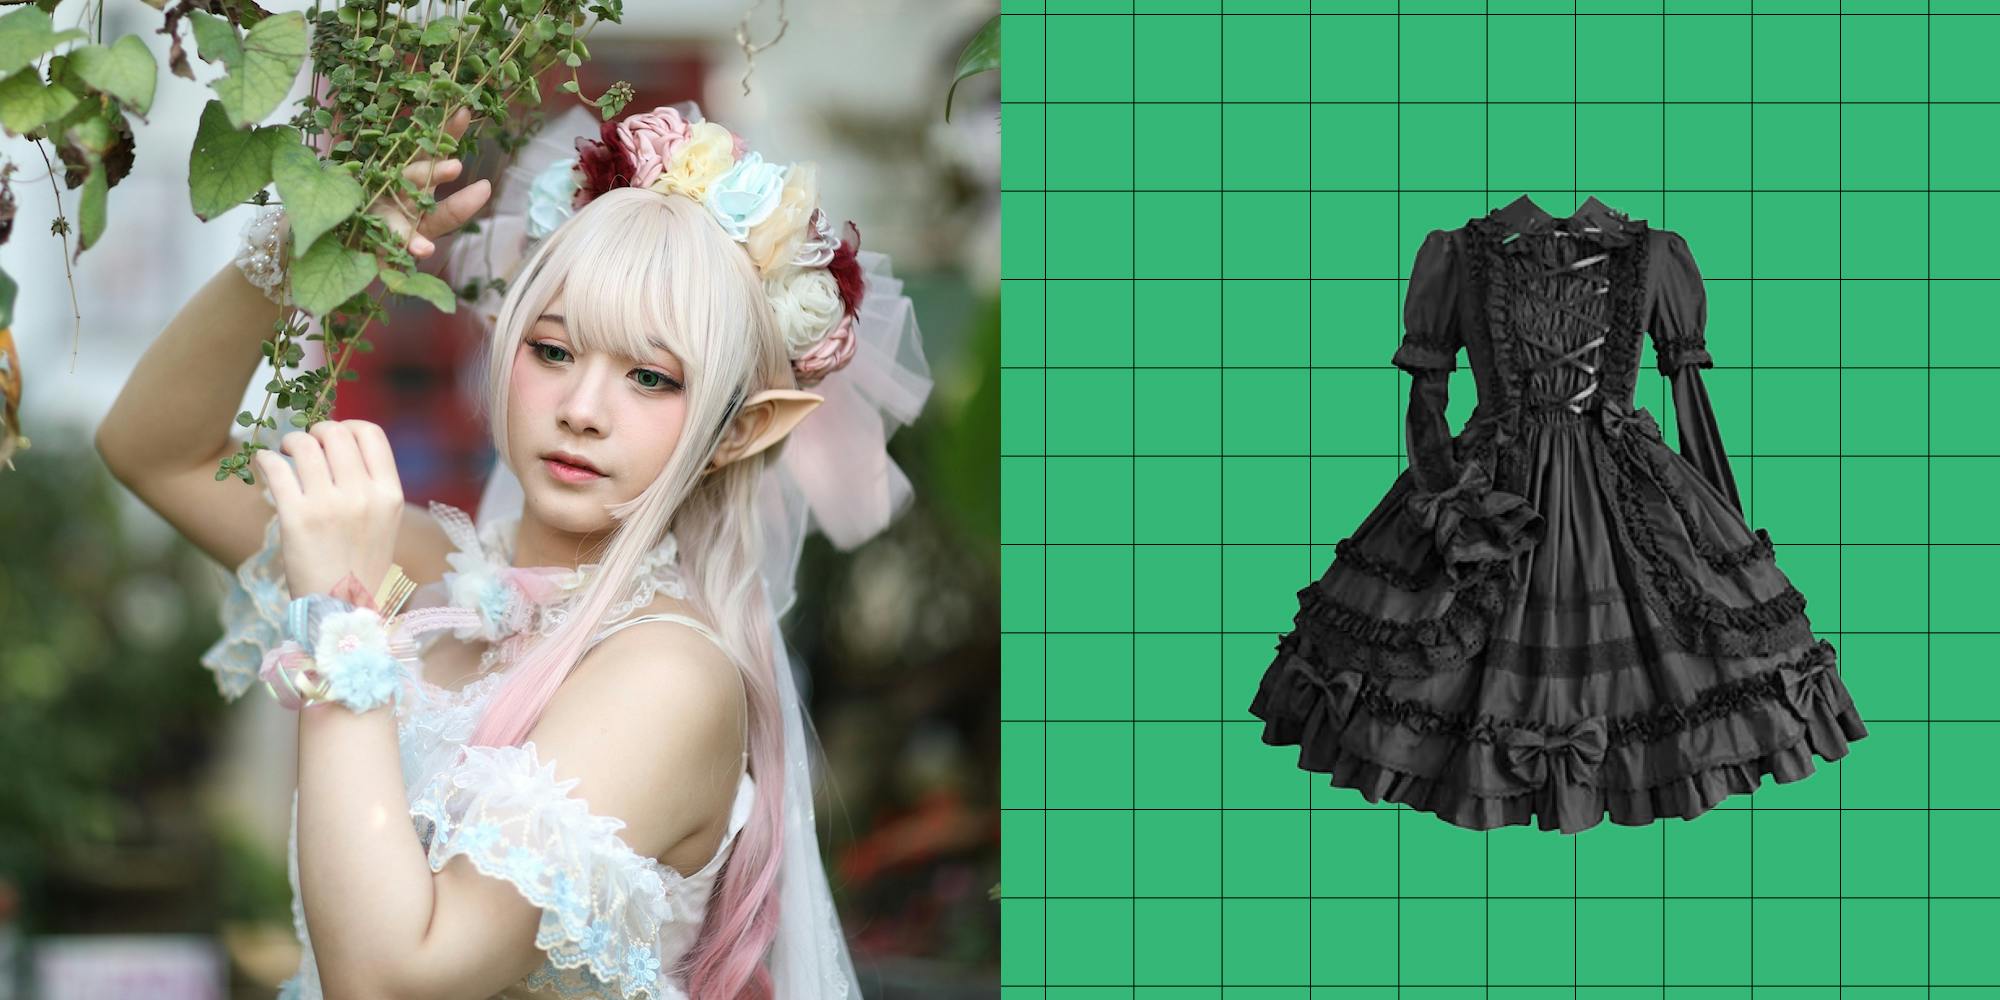 Losing Lolita: Why is Lolita Fashion on a Decline? – The Connector